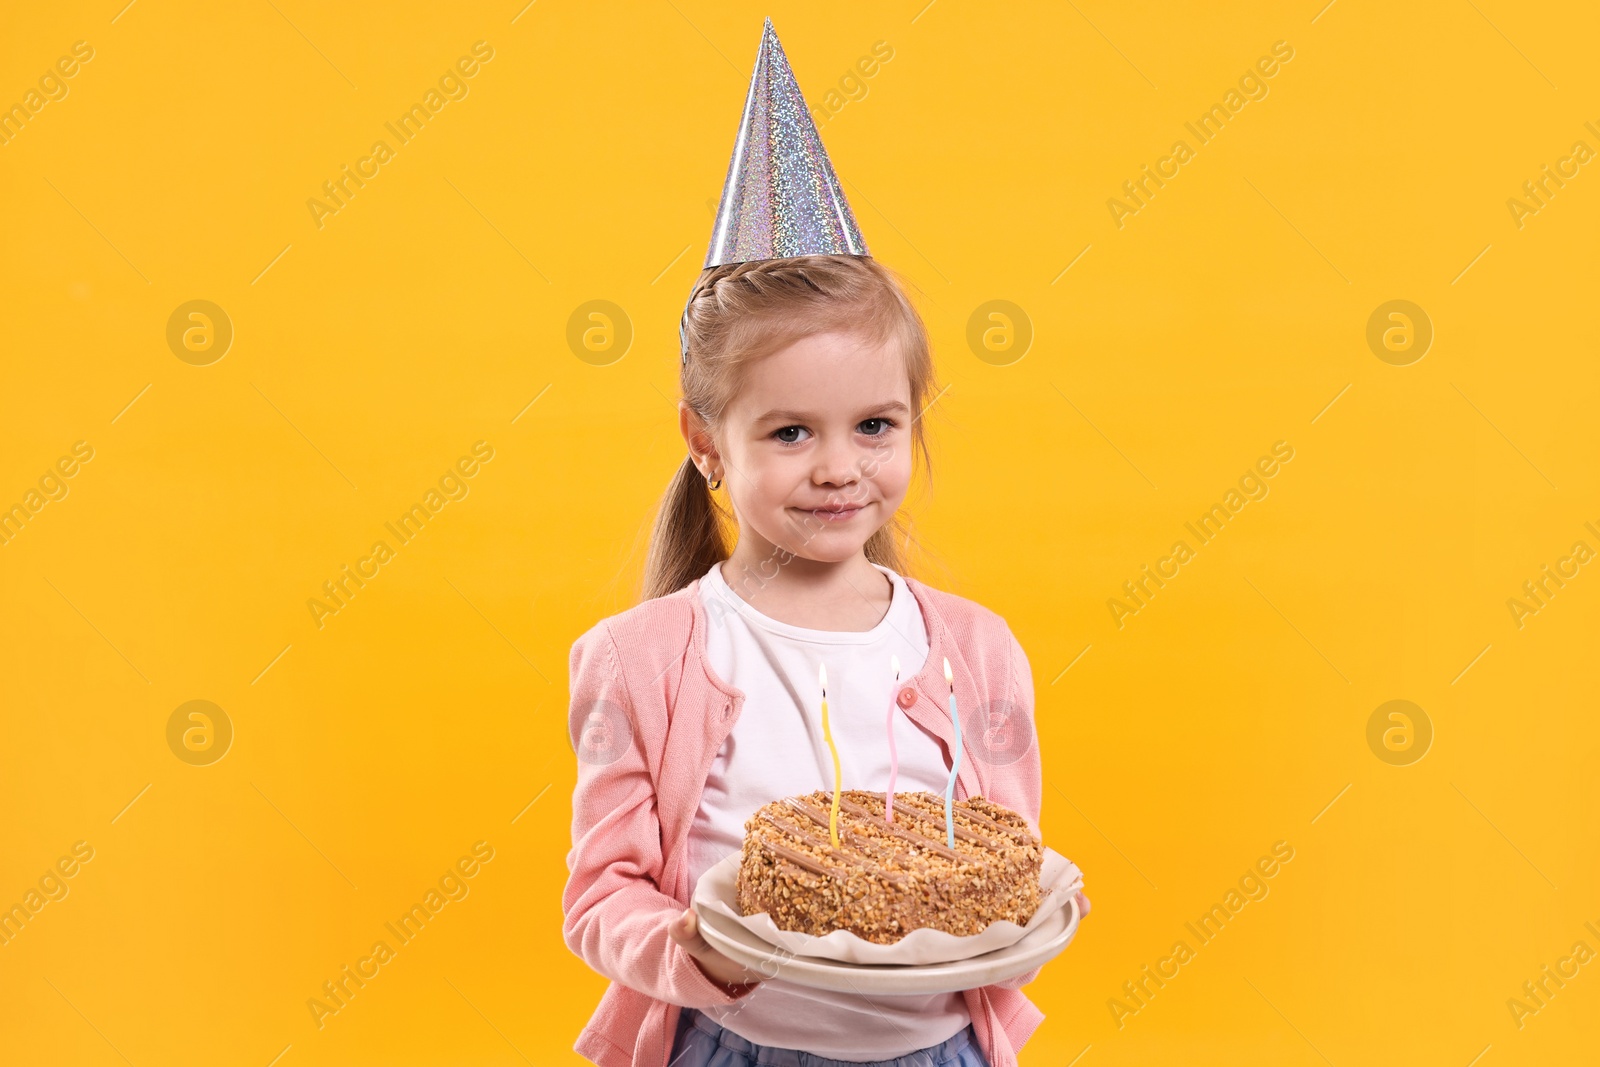 Photo of Birthday celebration. Cute little girl in party hat holding tasty cake with burning candles on orange background